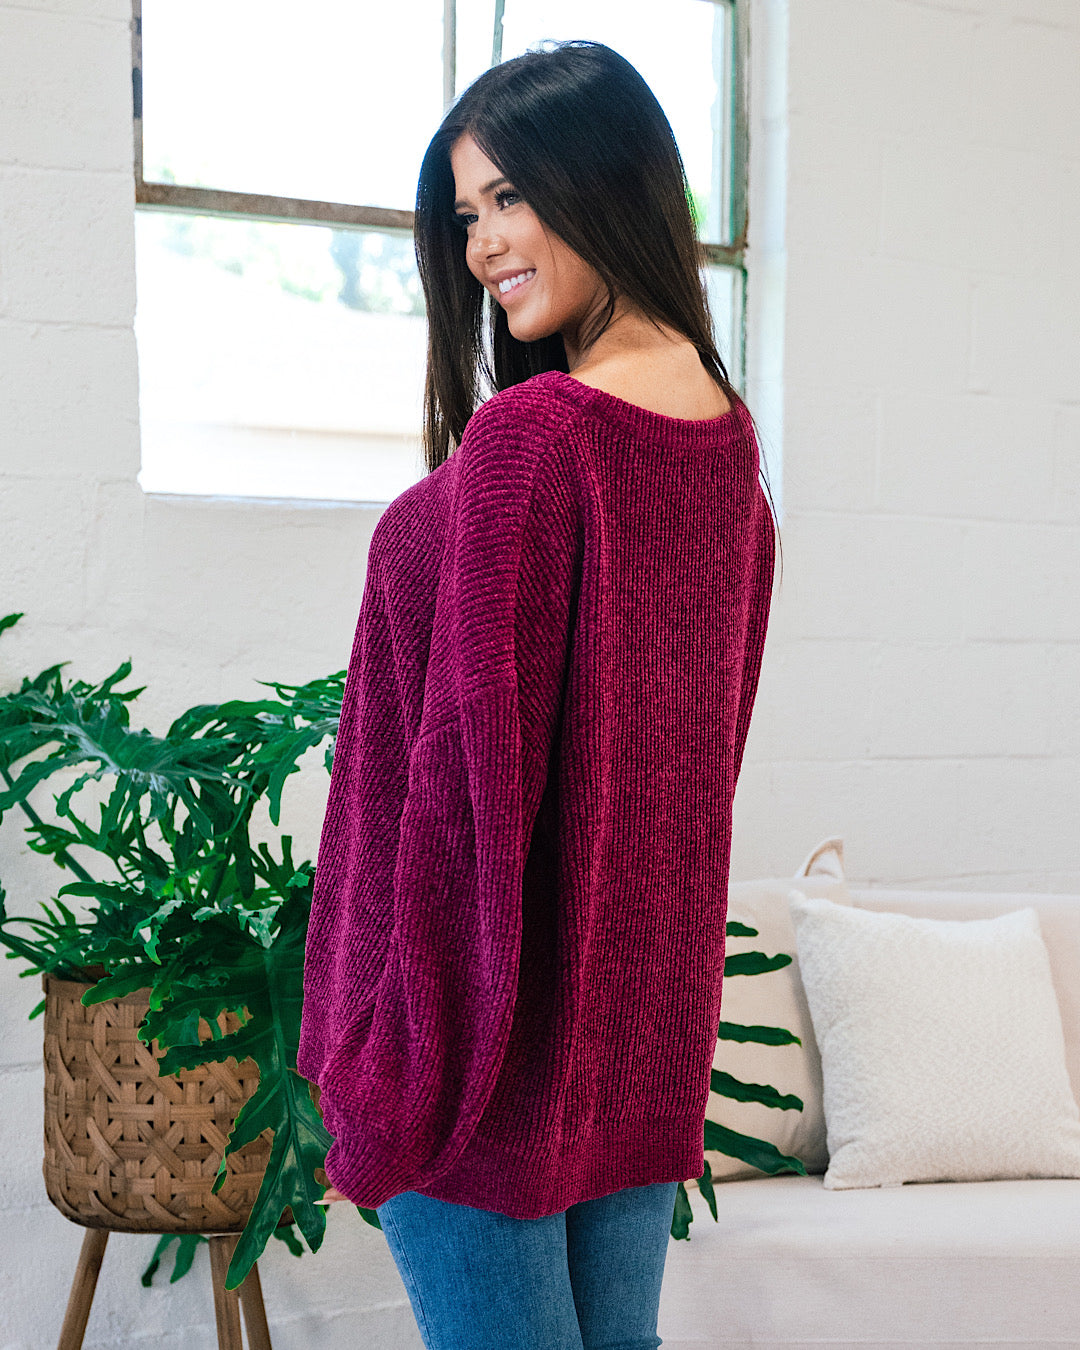 Lost Track Maroon Chenille Sweater FINAL SALE  First Love   